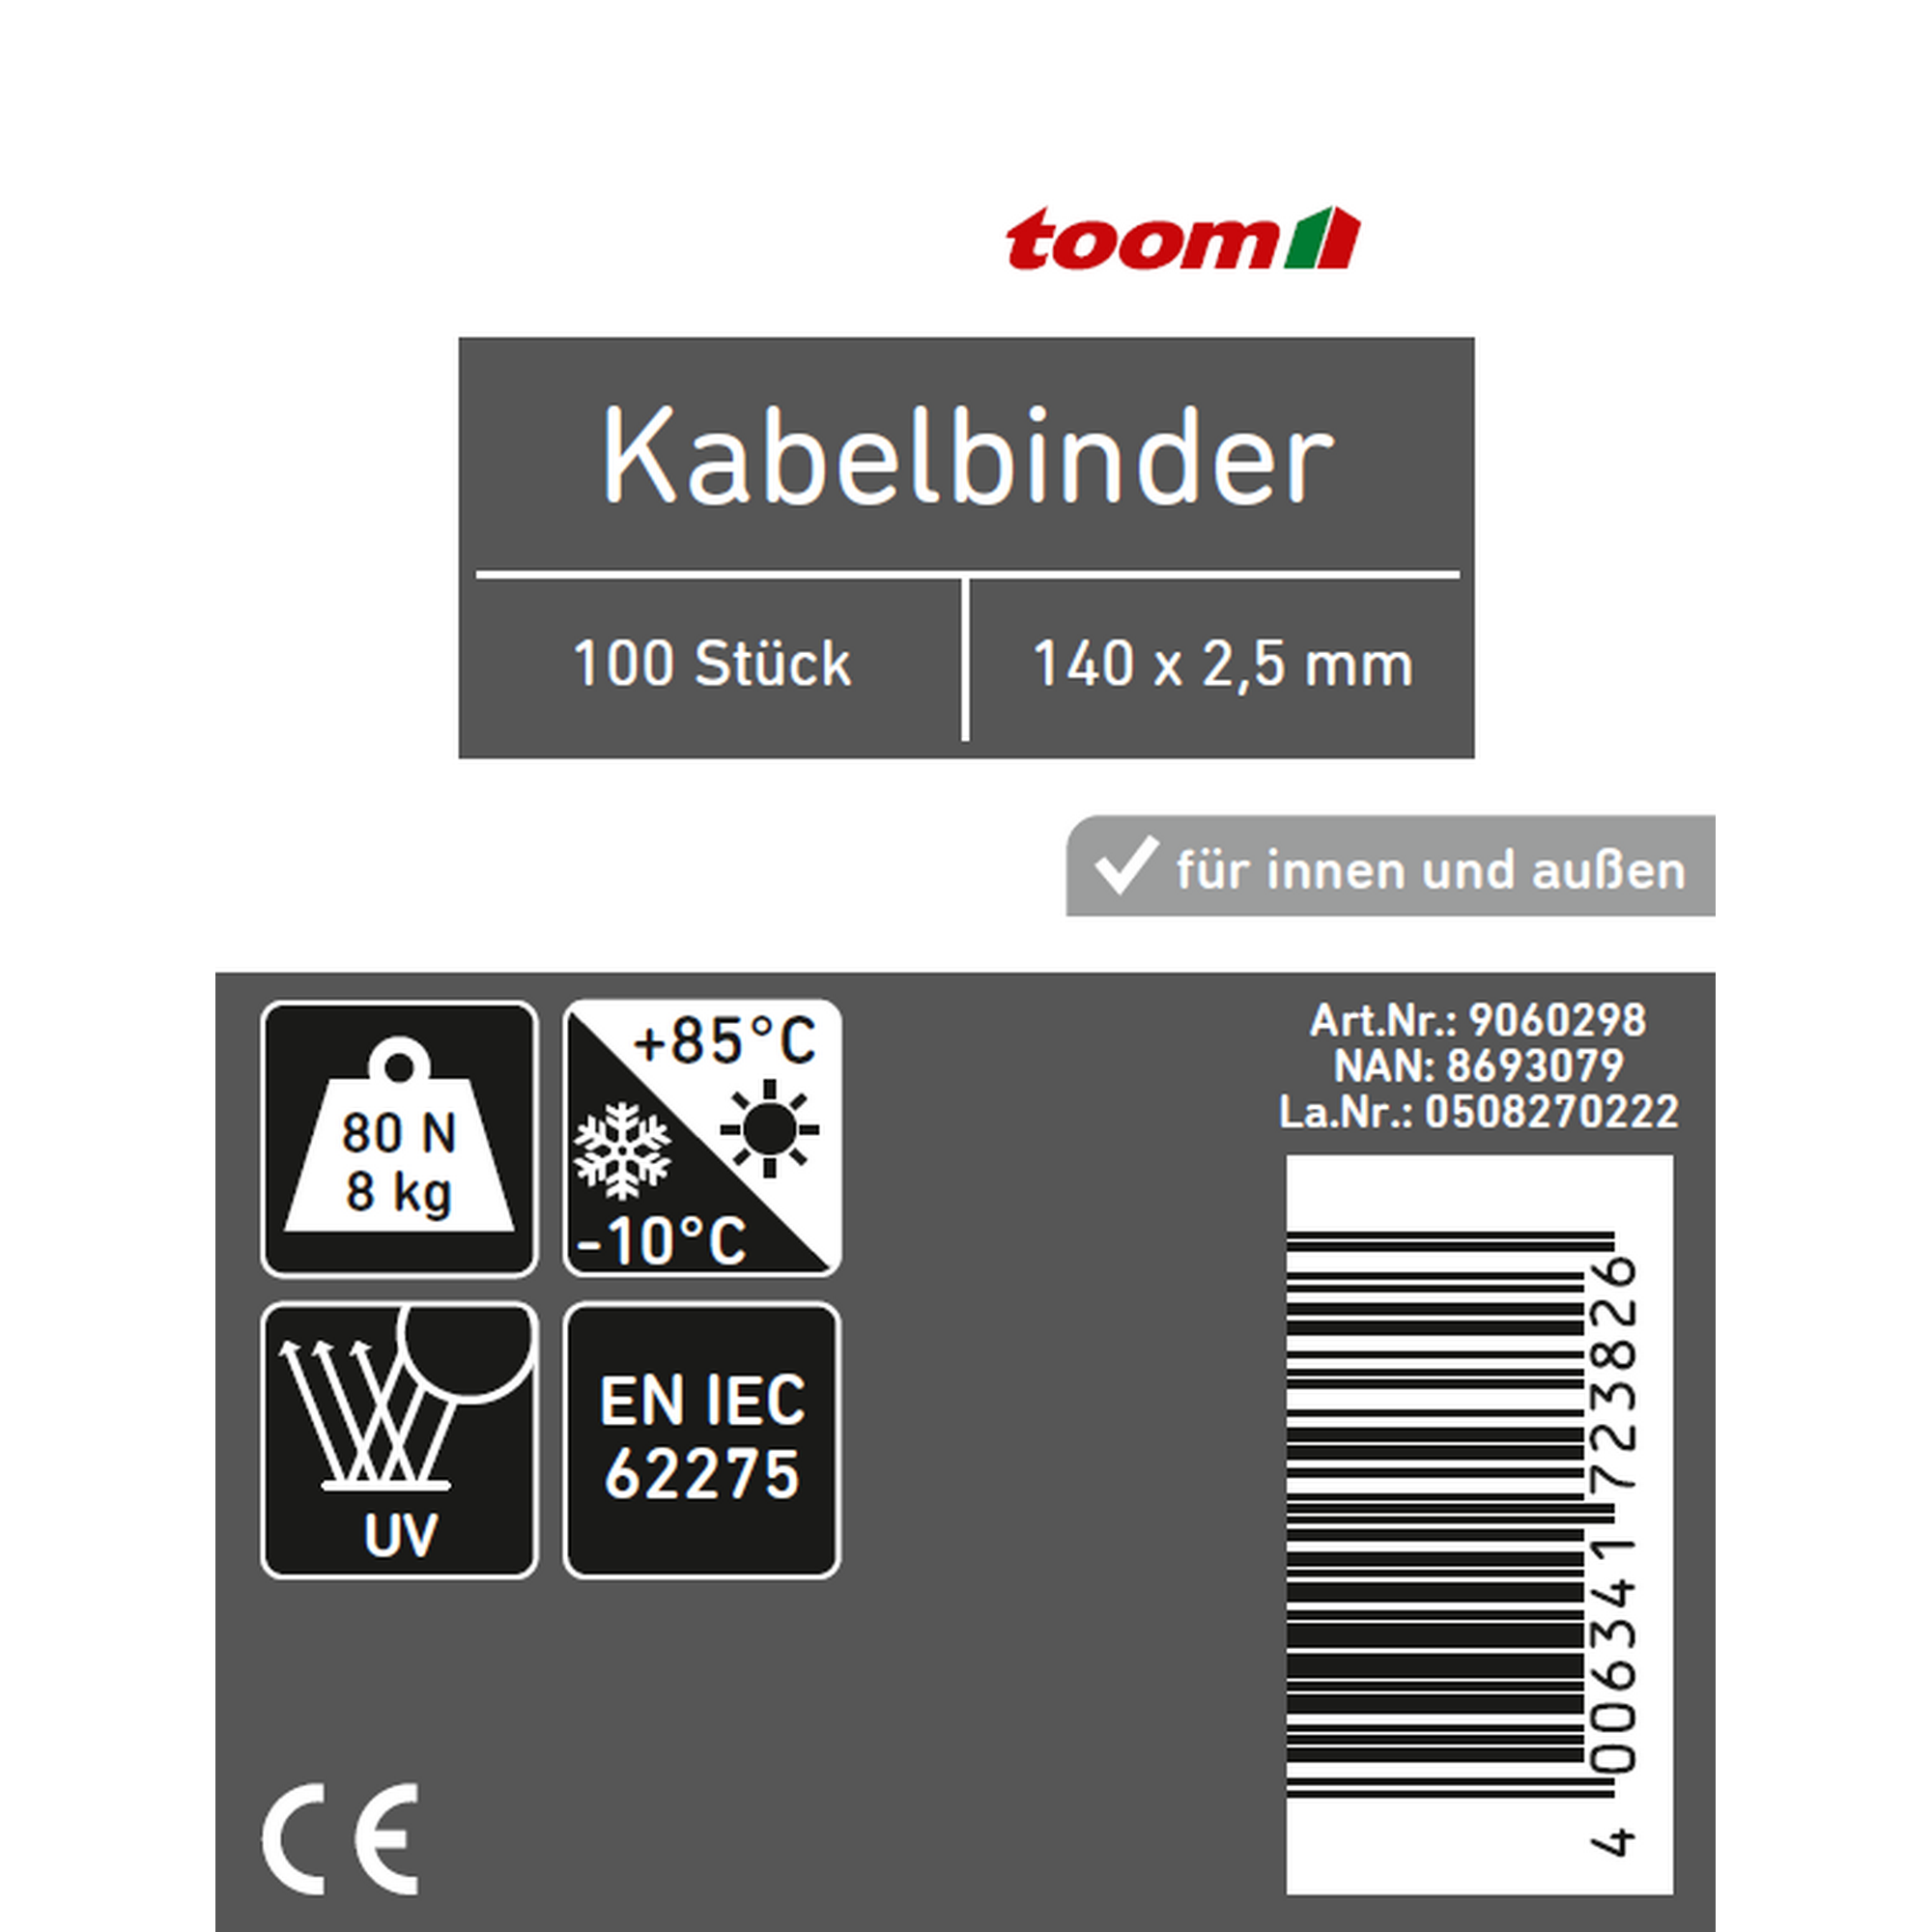 Kabelbinder weiß 2,5 x 140 mm 100 Stück + product picture